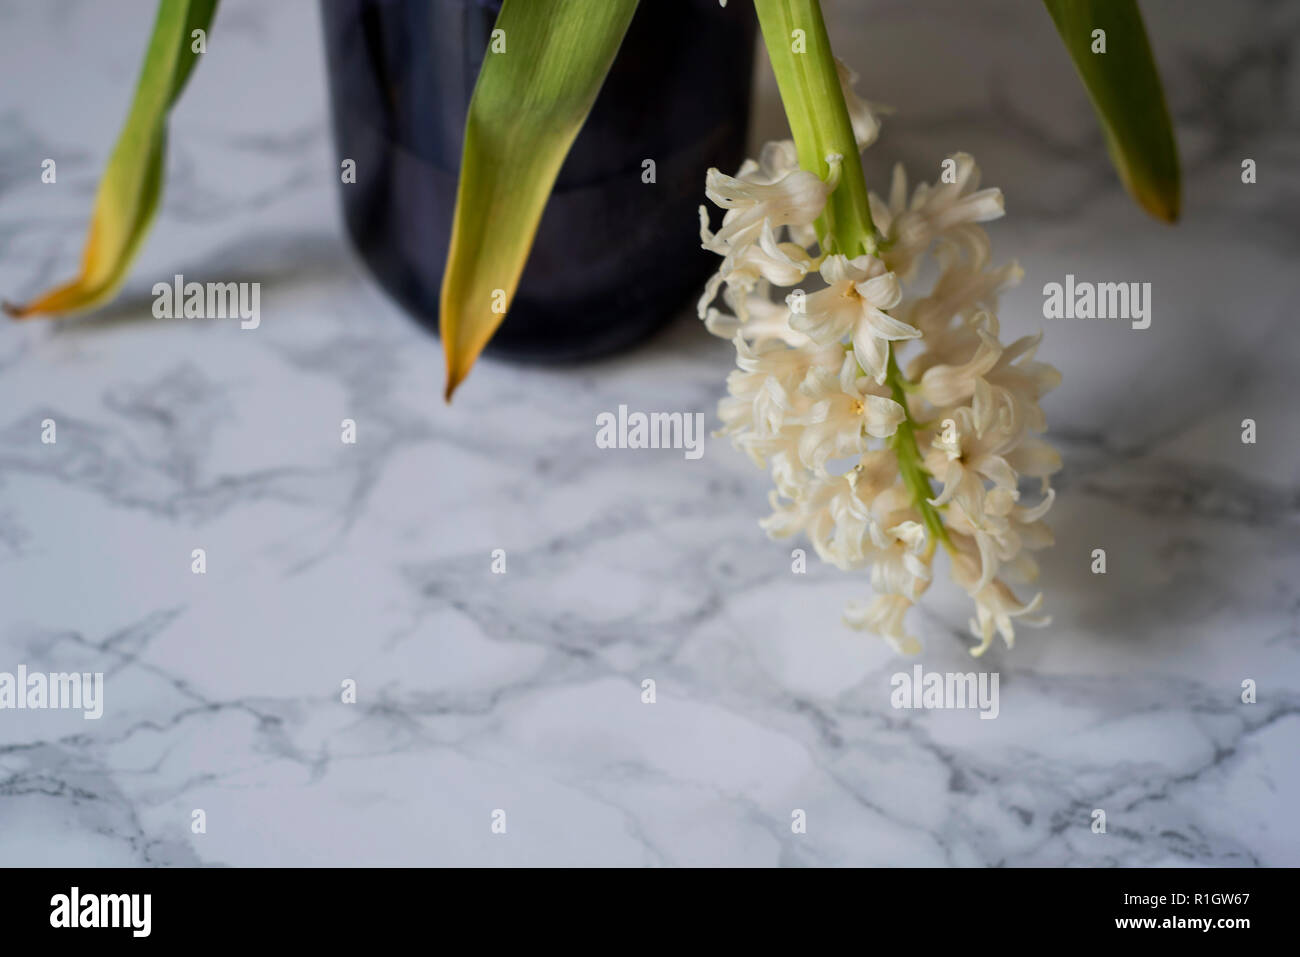 Up Close with one stem of wilting hyacinth flowers and browning leaves in a blue glass jar on a marble surface Stock Photo